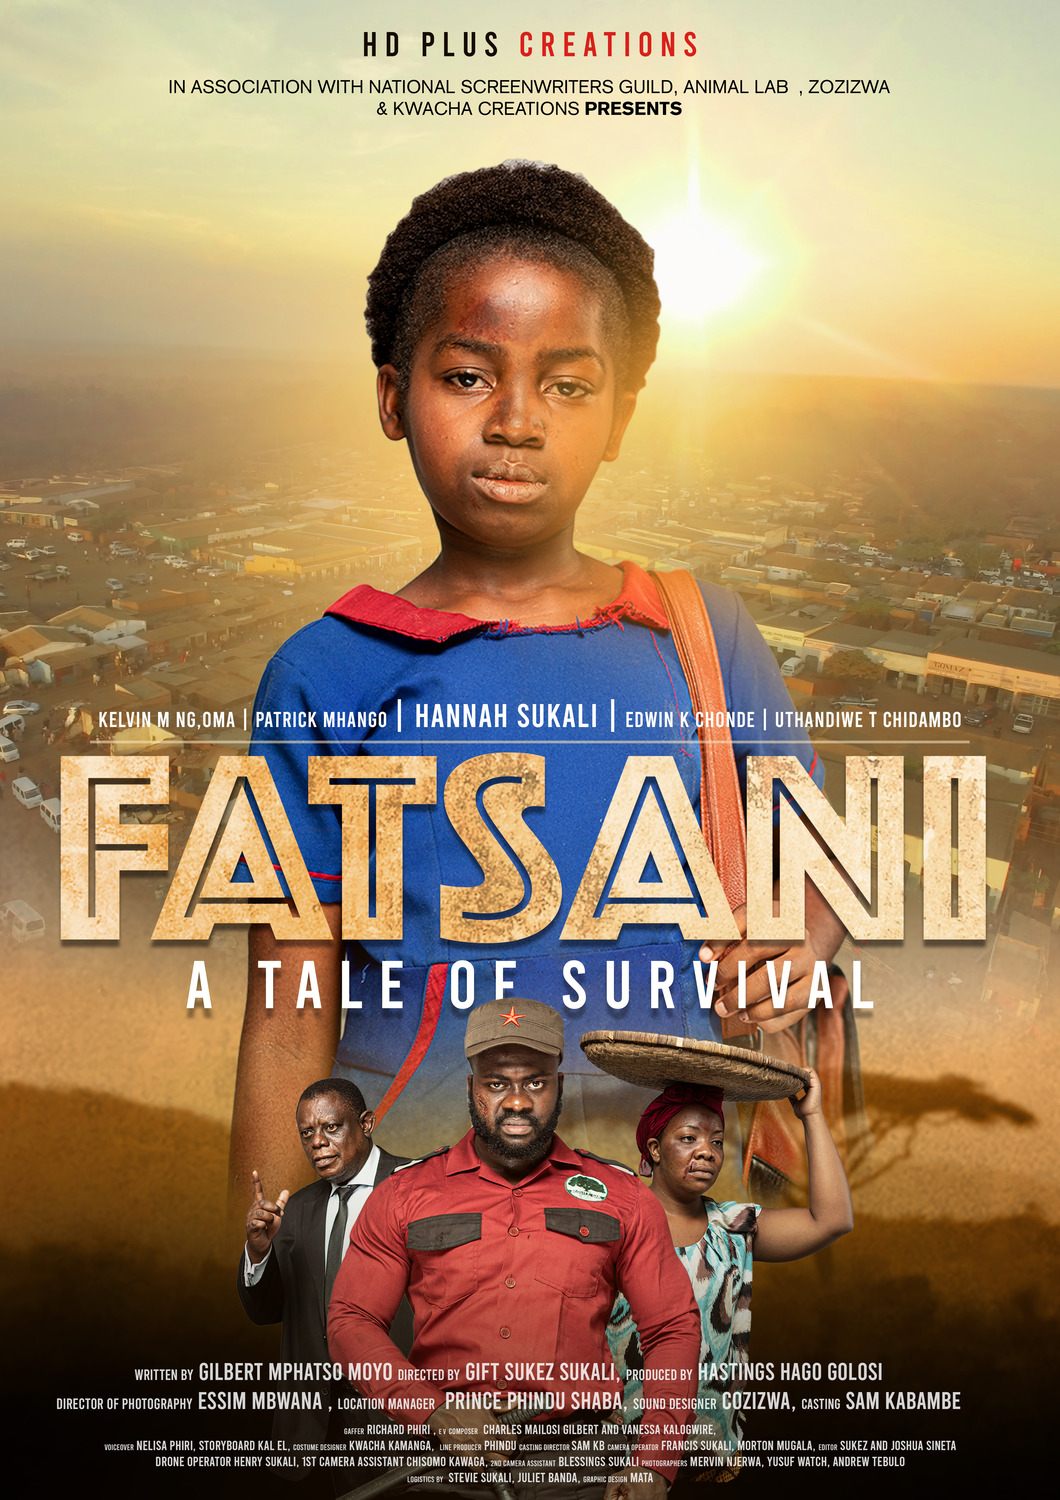 Extra Large Movie Poster Image for Fatsani - Tale of Survival 